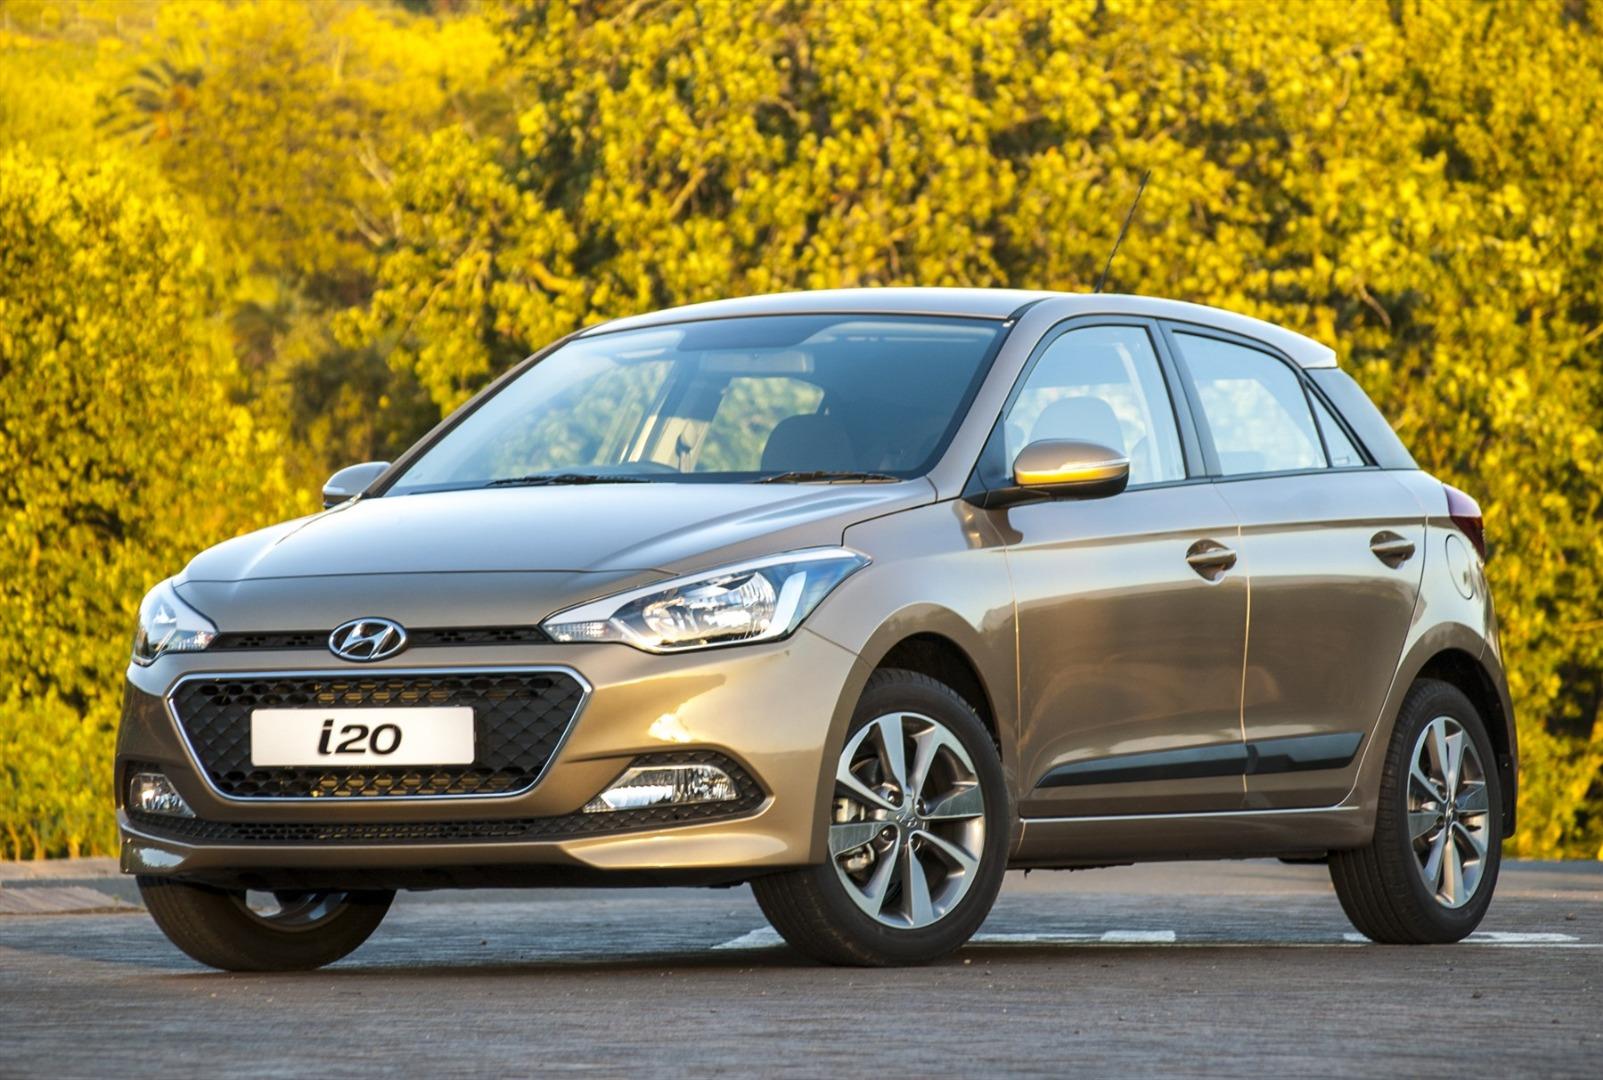 Hyundai i20 vs Fiat Tipo vs KIA Rio: which one is the best value for money? - Buying a Car - AutoTrader